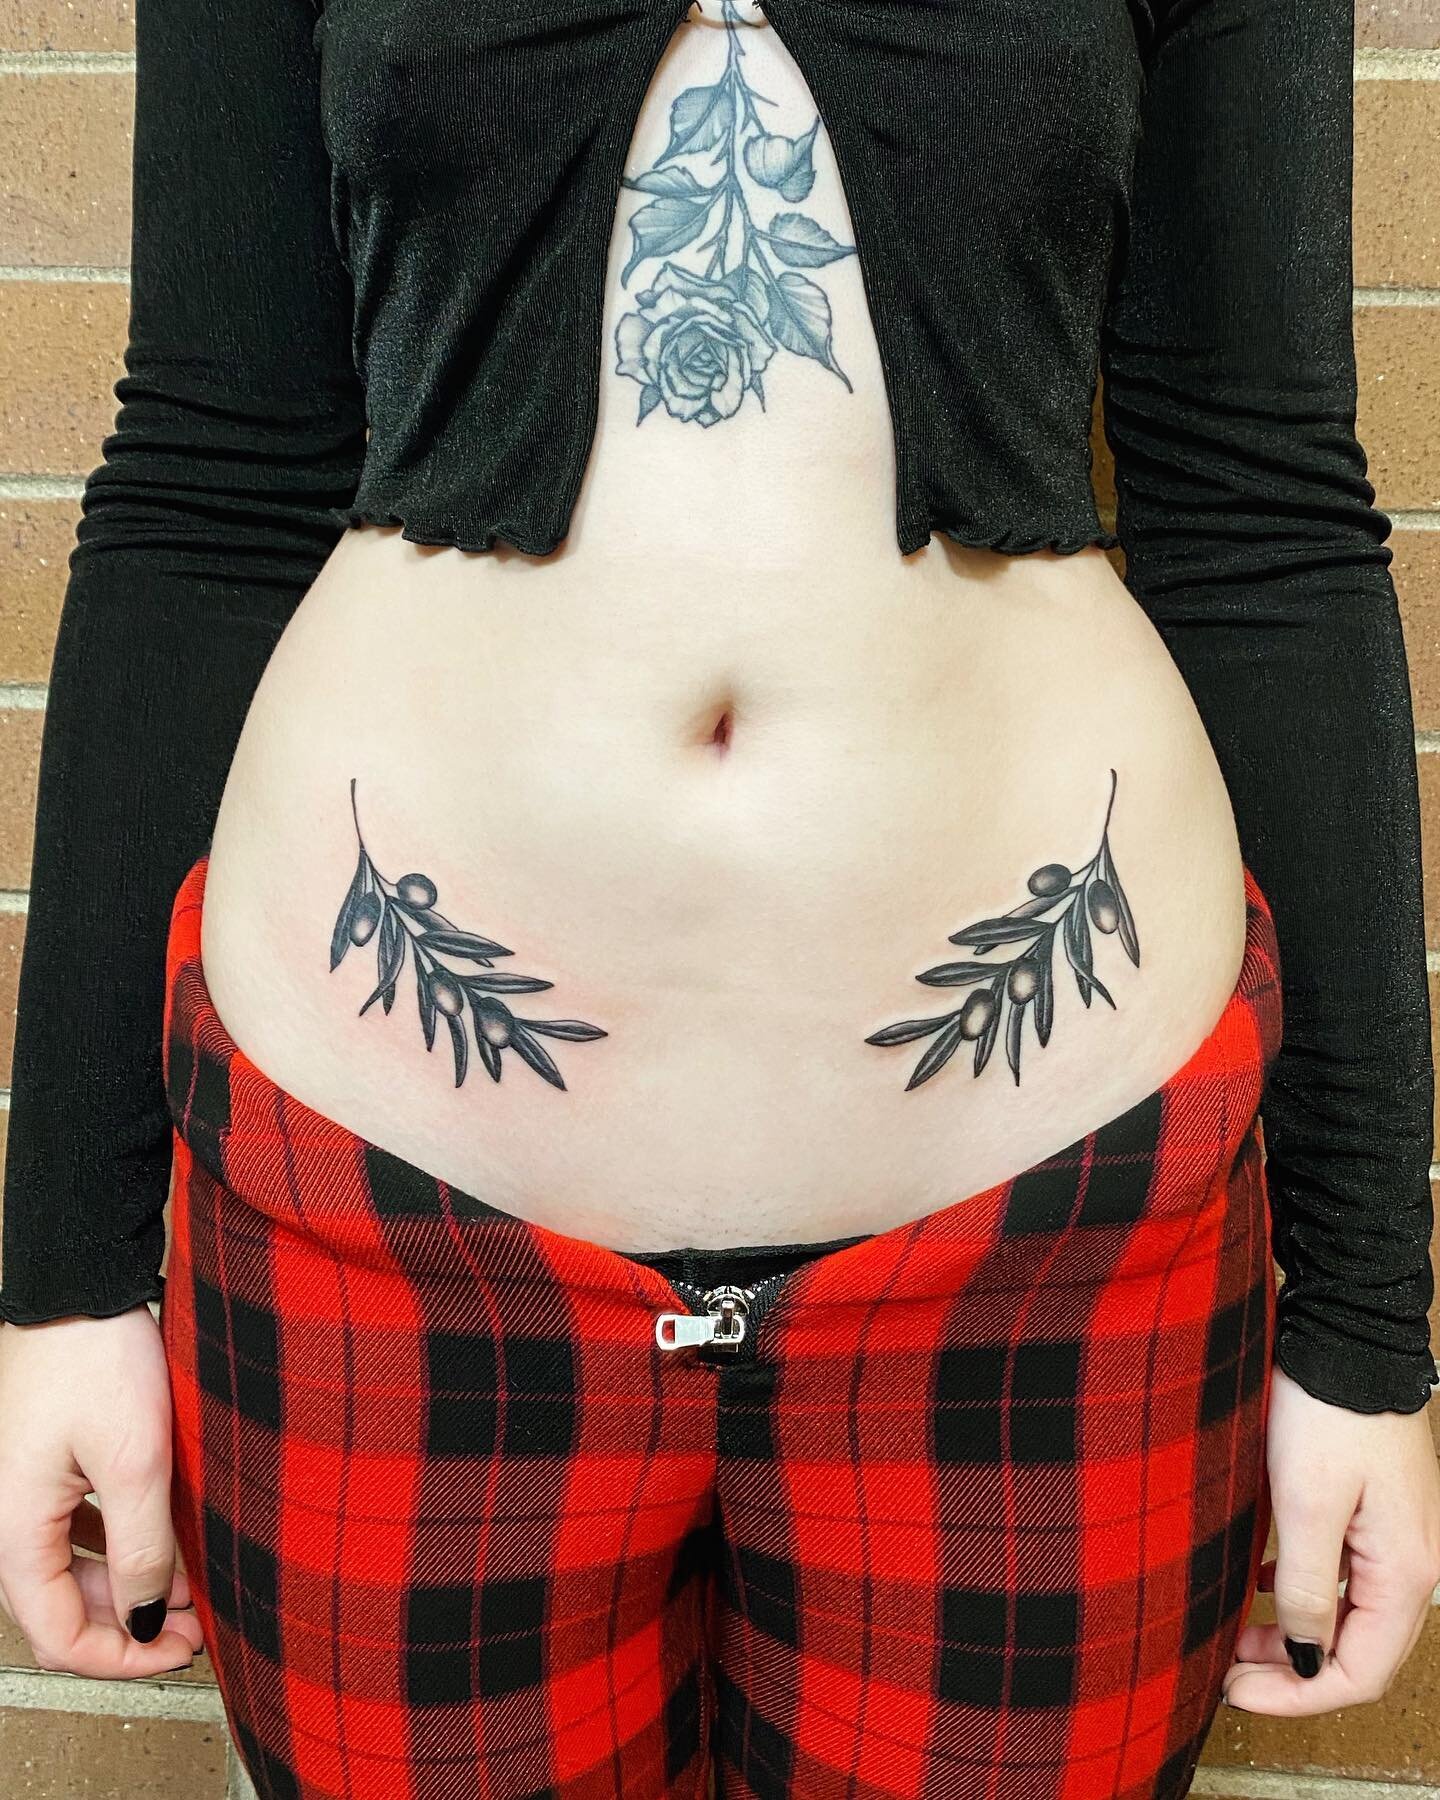 symmetrical olive branches for ava, thanks for the trust!

done at @familytattoo